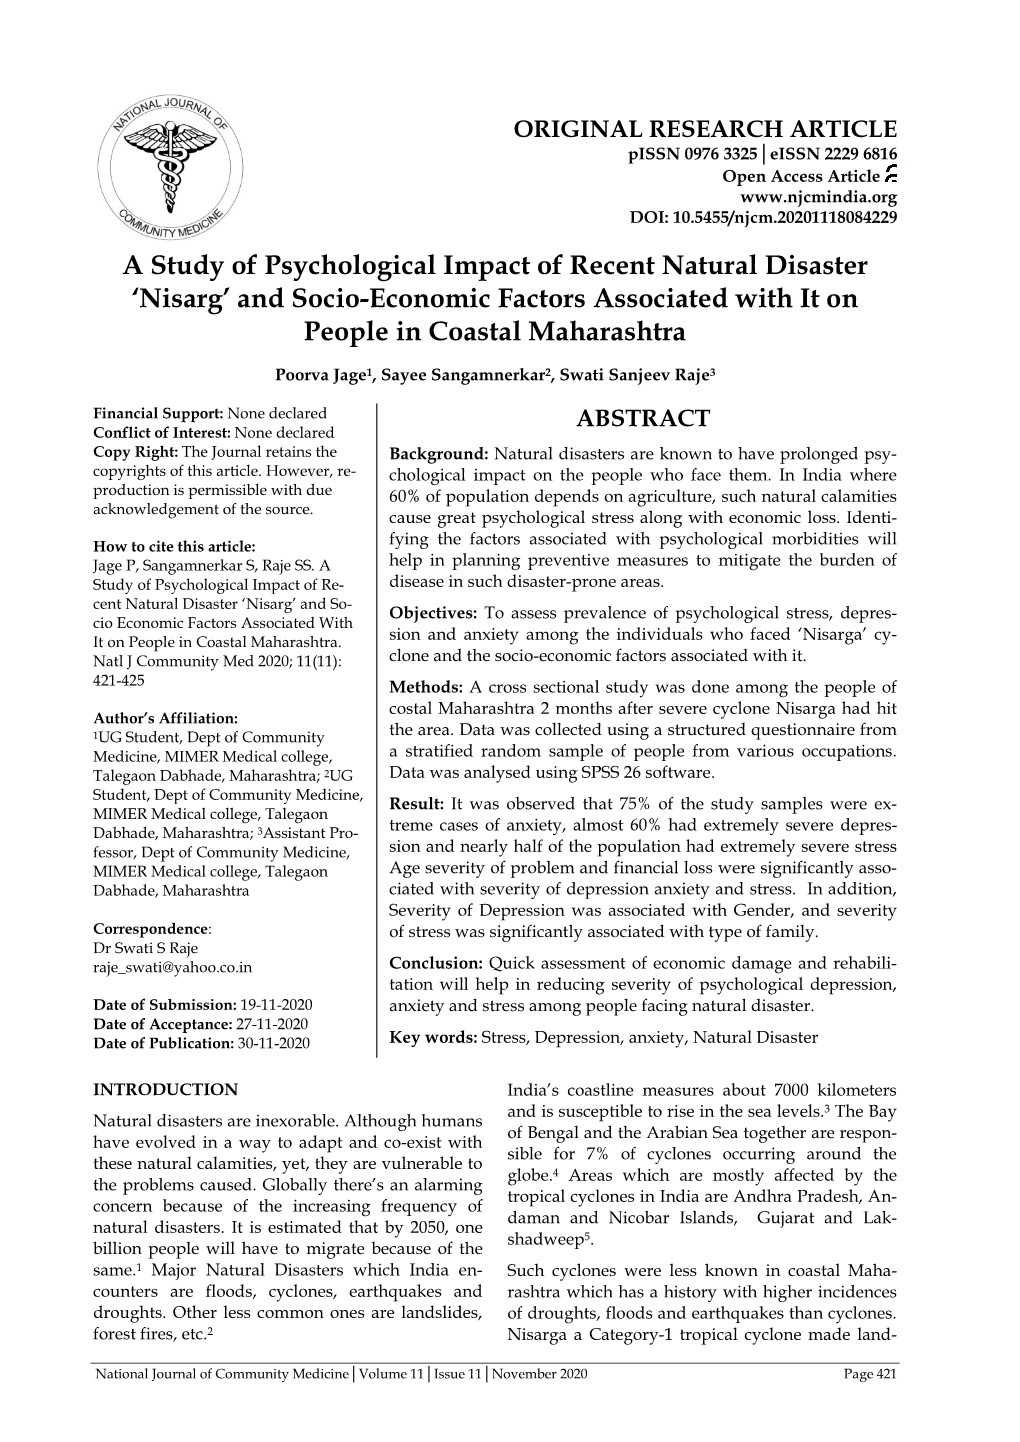 A Study of Psychological Impact of Recent Natural Disaster 'Nisarg'